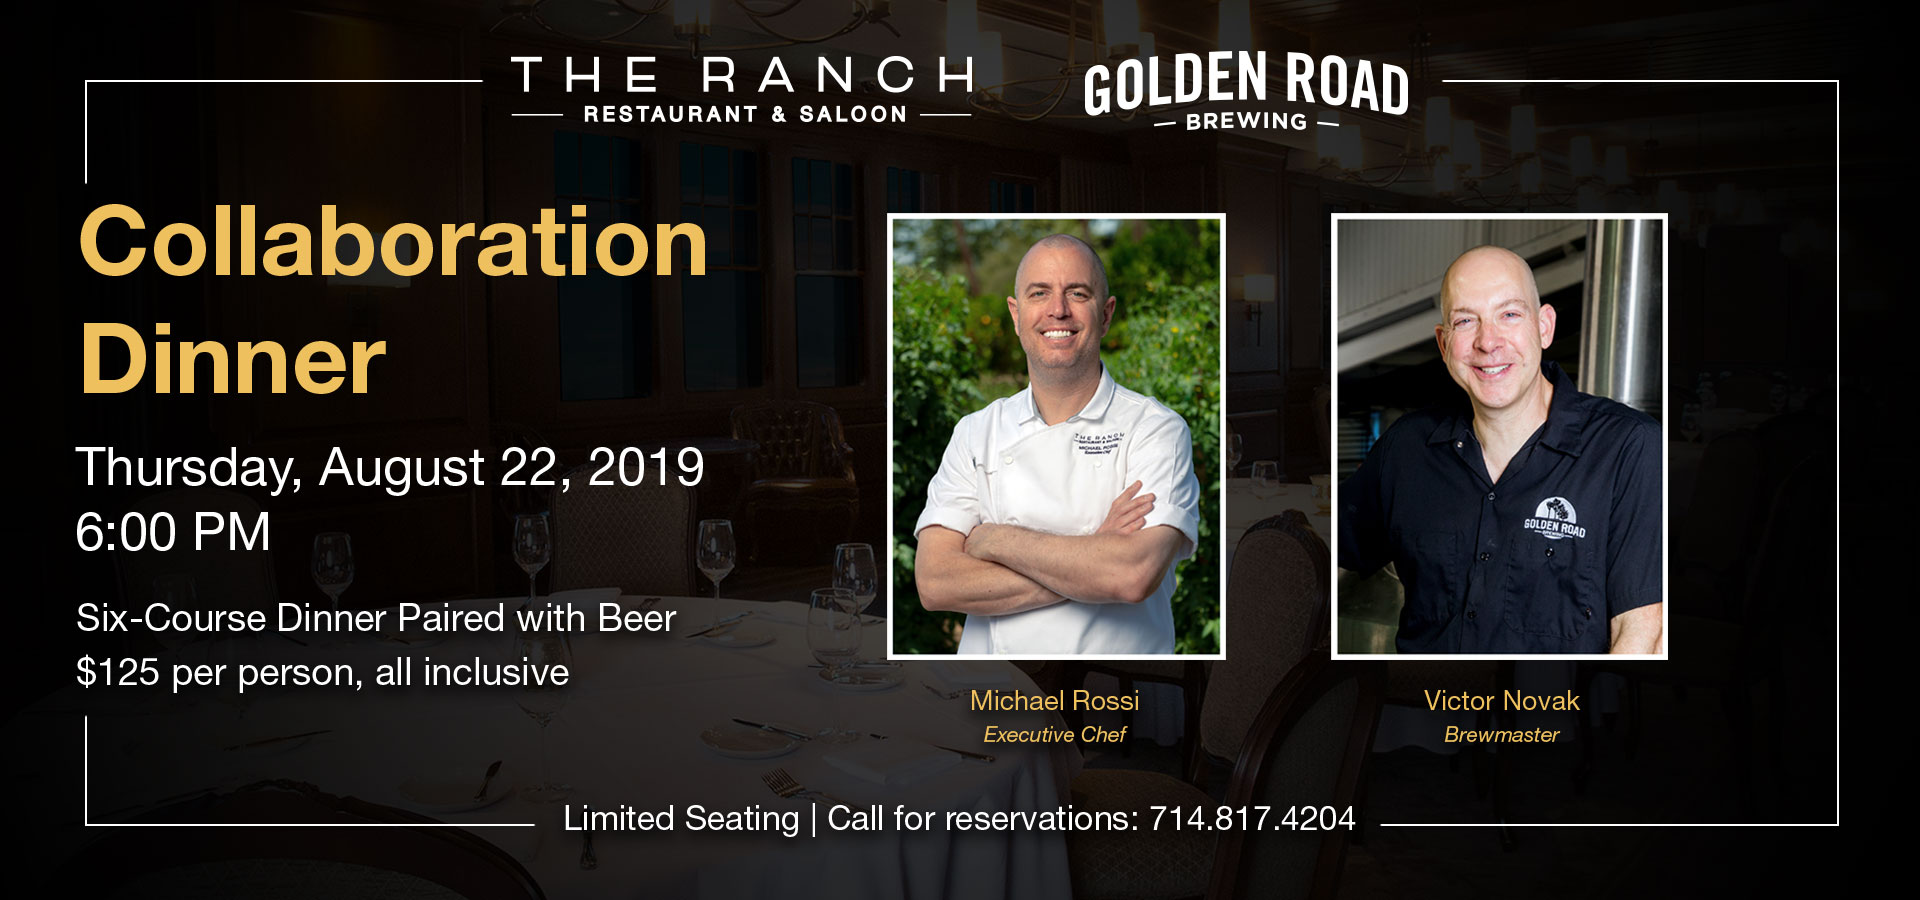 Executive Chef Michael Rossi of THE RANCH Restaurant & Saloon is set to collaborate with Brewmaster Victor Novak of Golden Road Brewing for THE RANCH’s first ever Beer Dinner